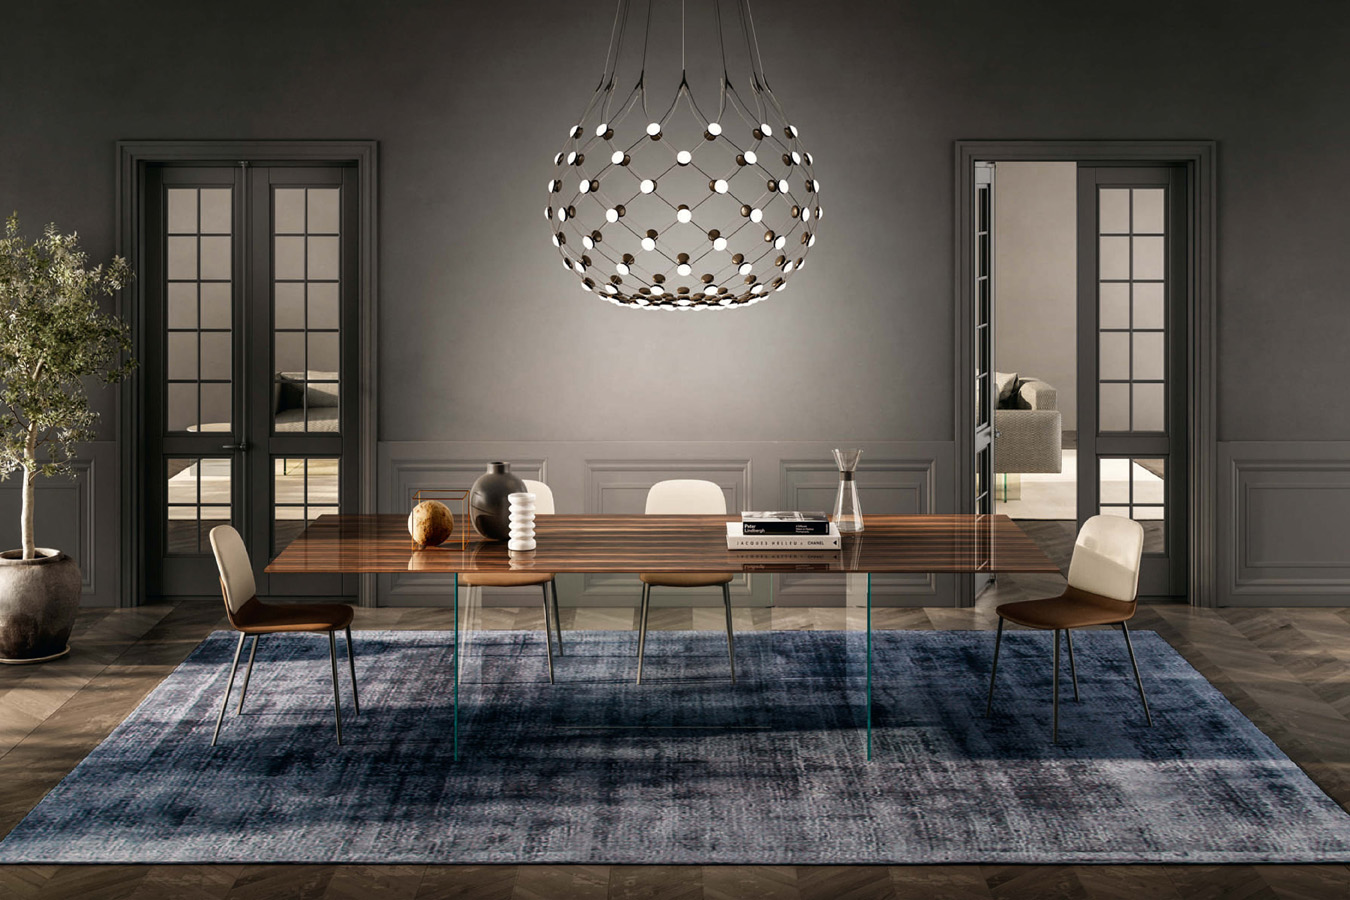 Lago Dining Room Table Air Slim Table 02